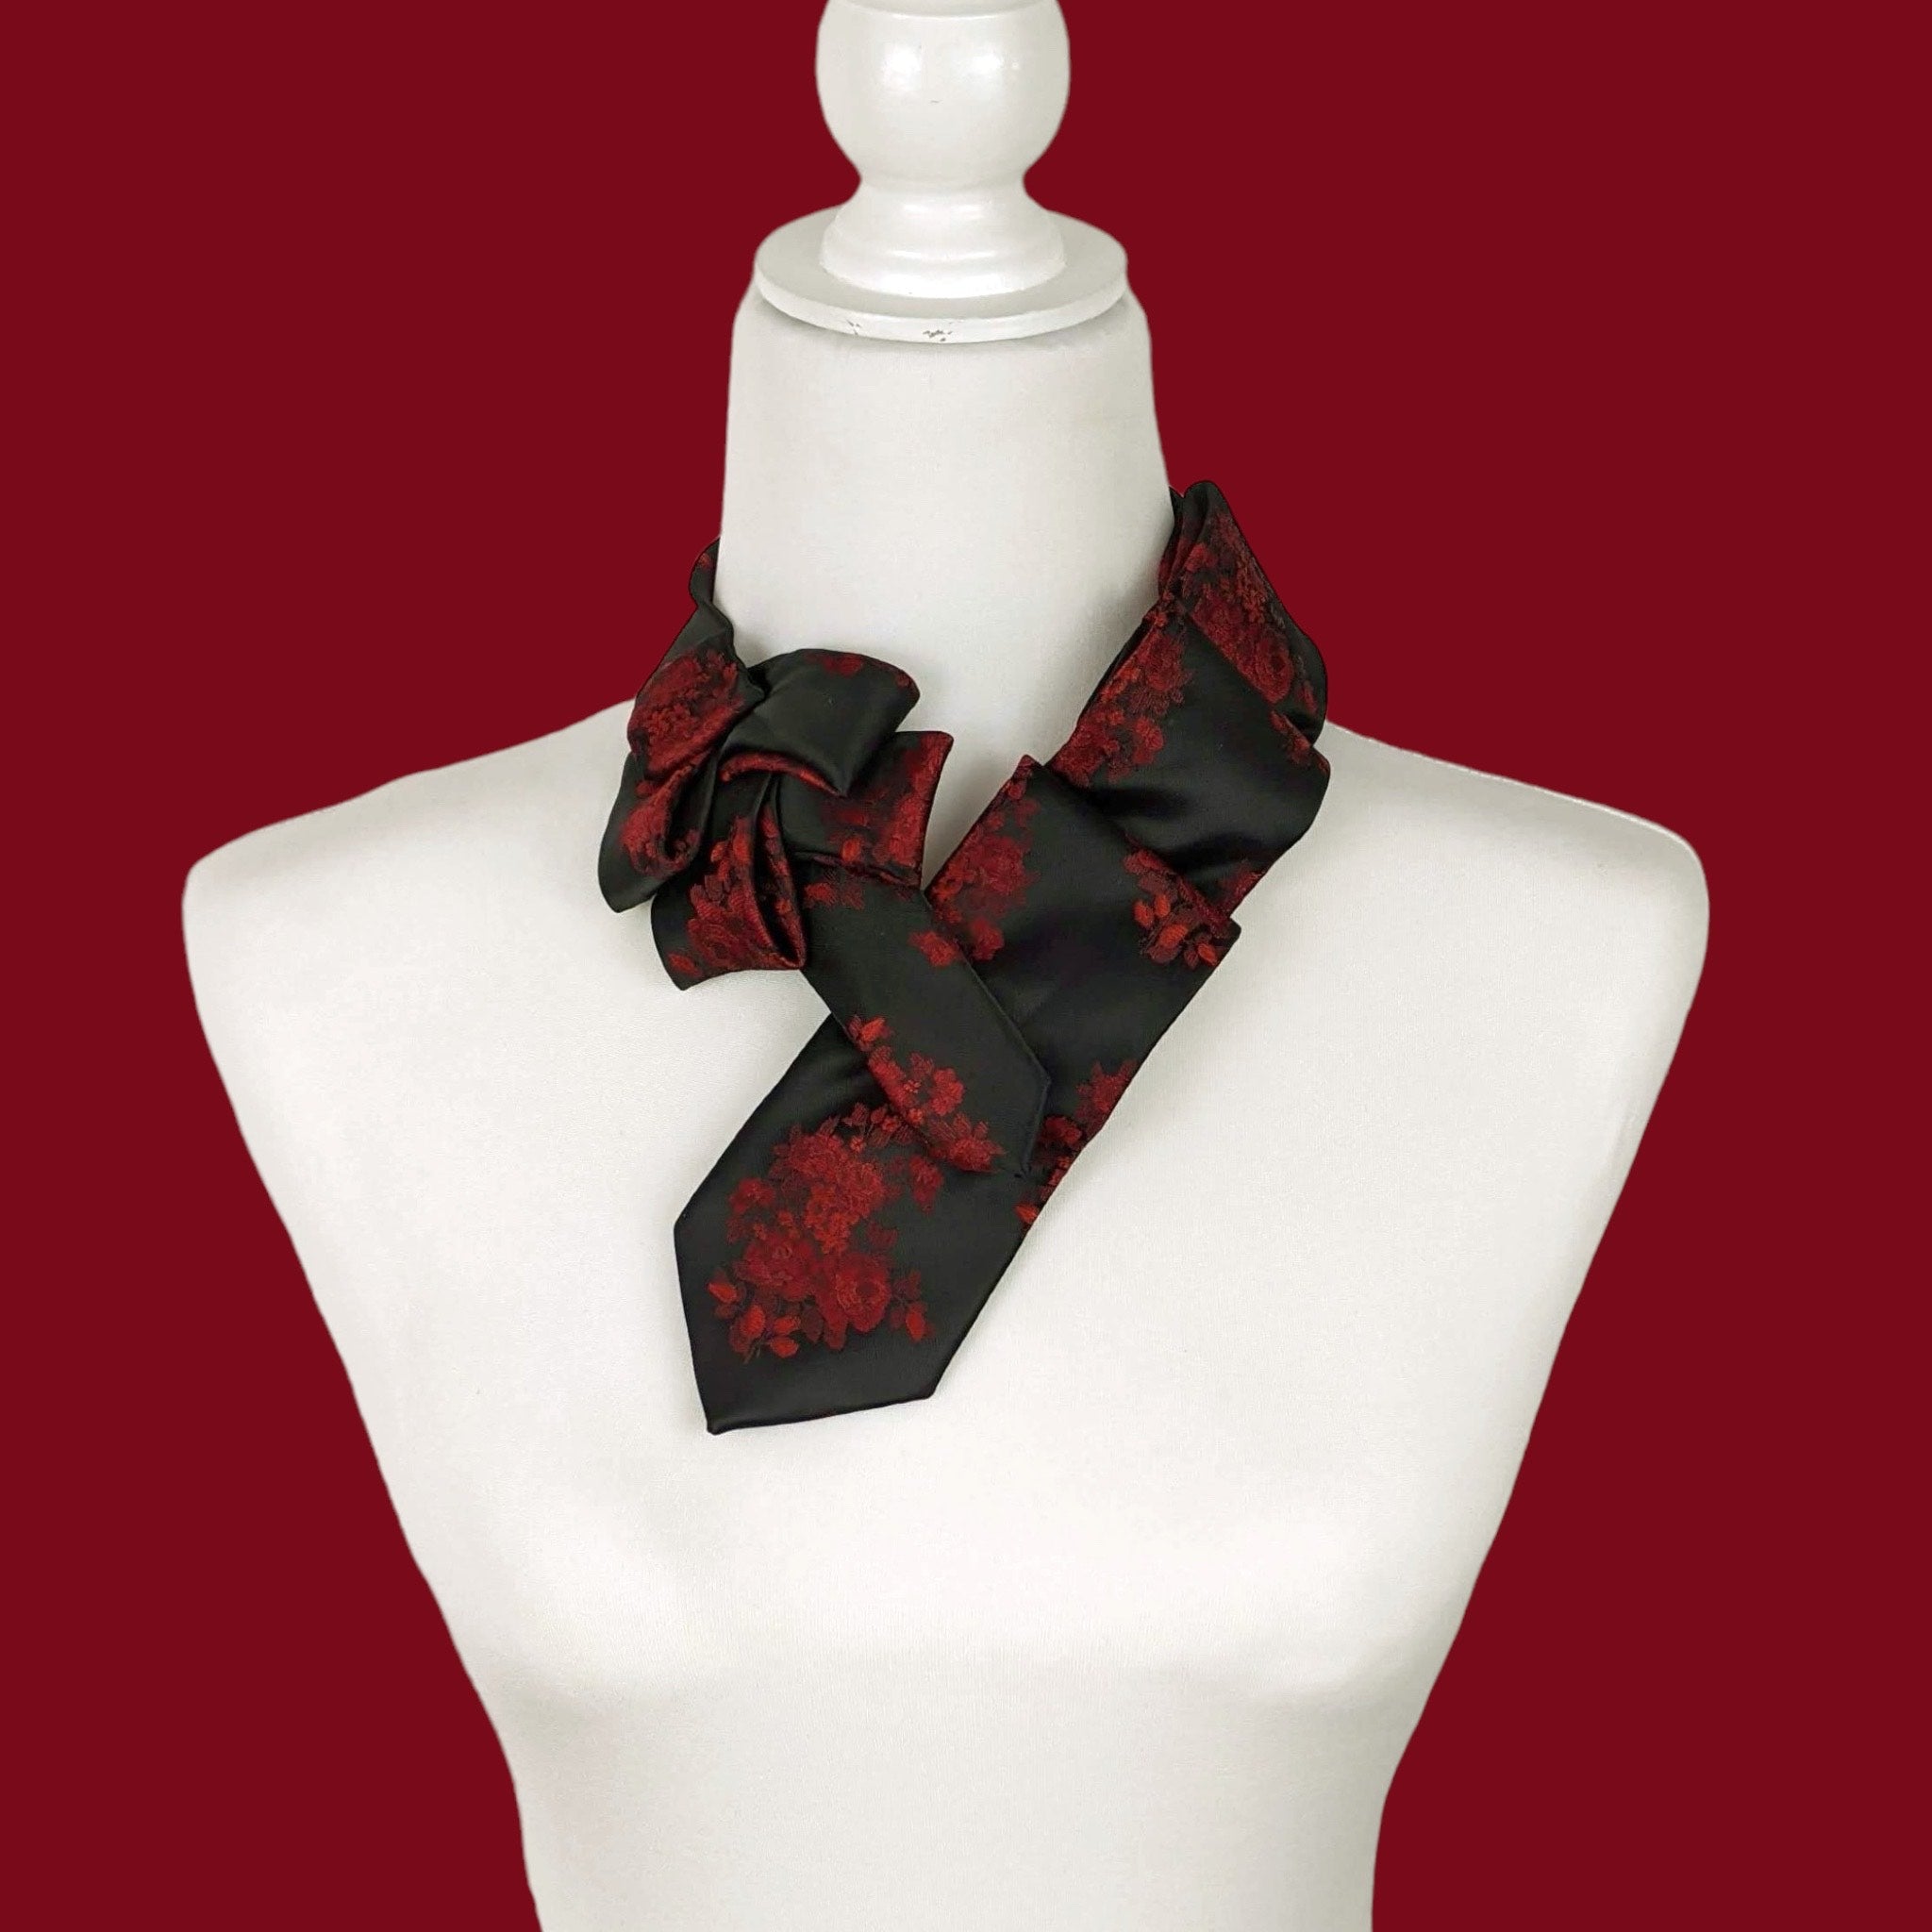 Women's Skinny Black Ascot Scarf With A Red Rose Print.